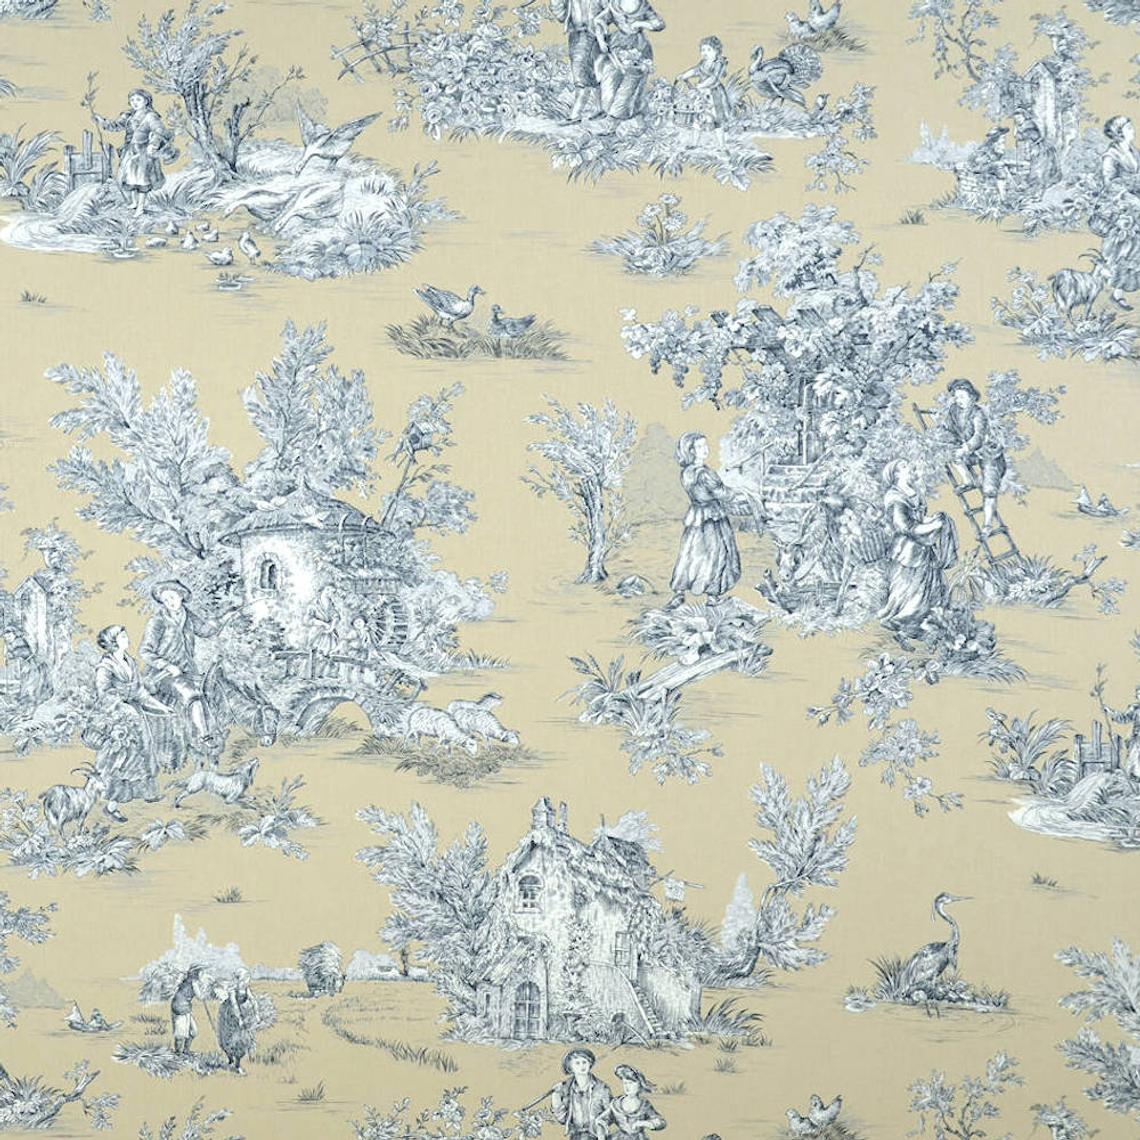 duvet cover in pastorale #88 blue on beige french country toile